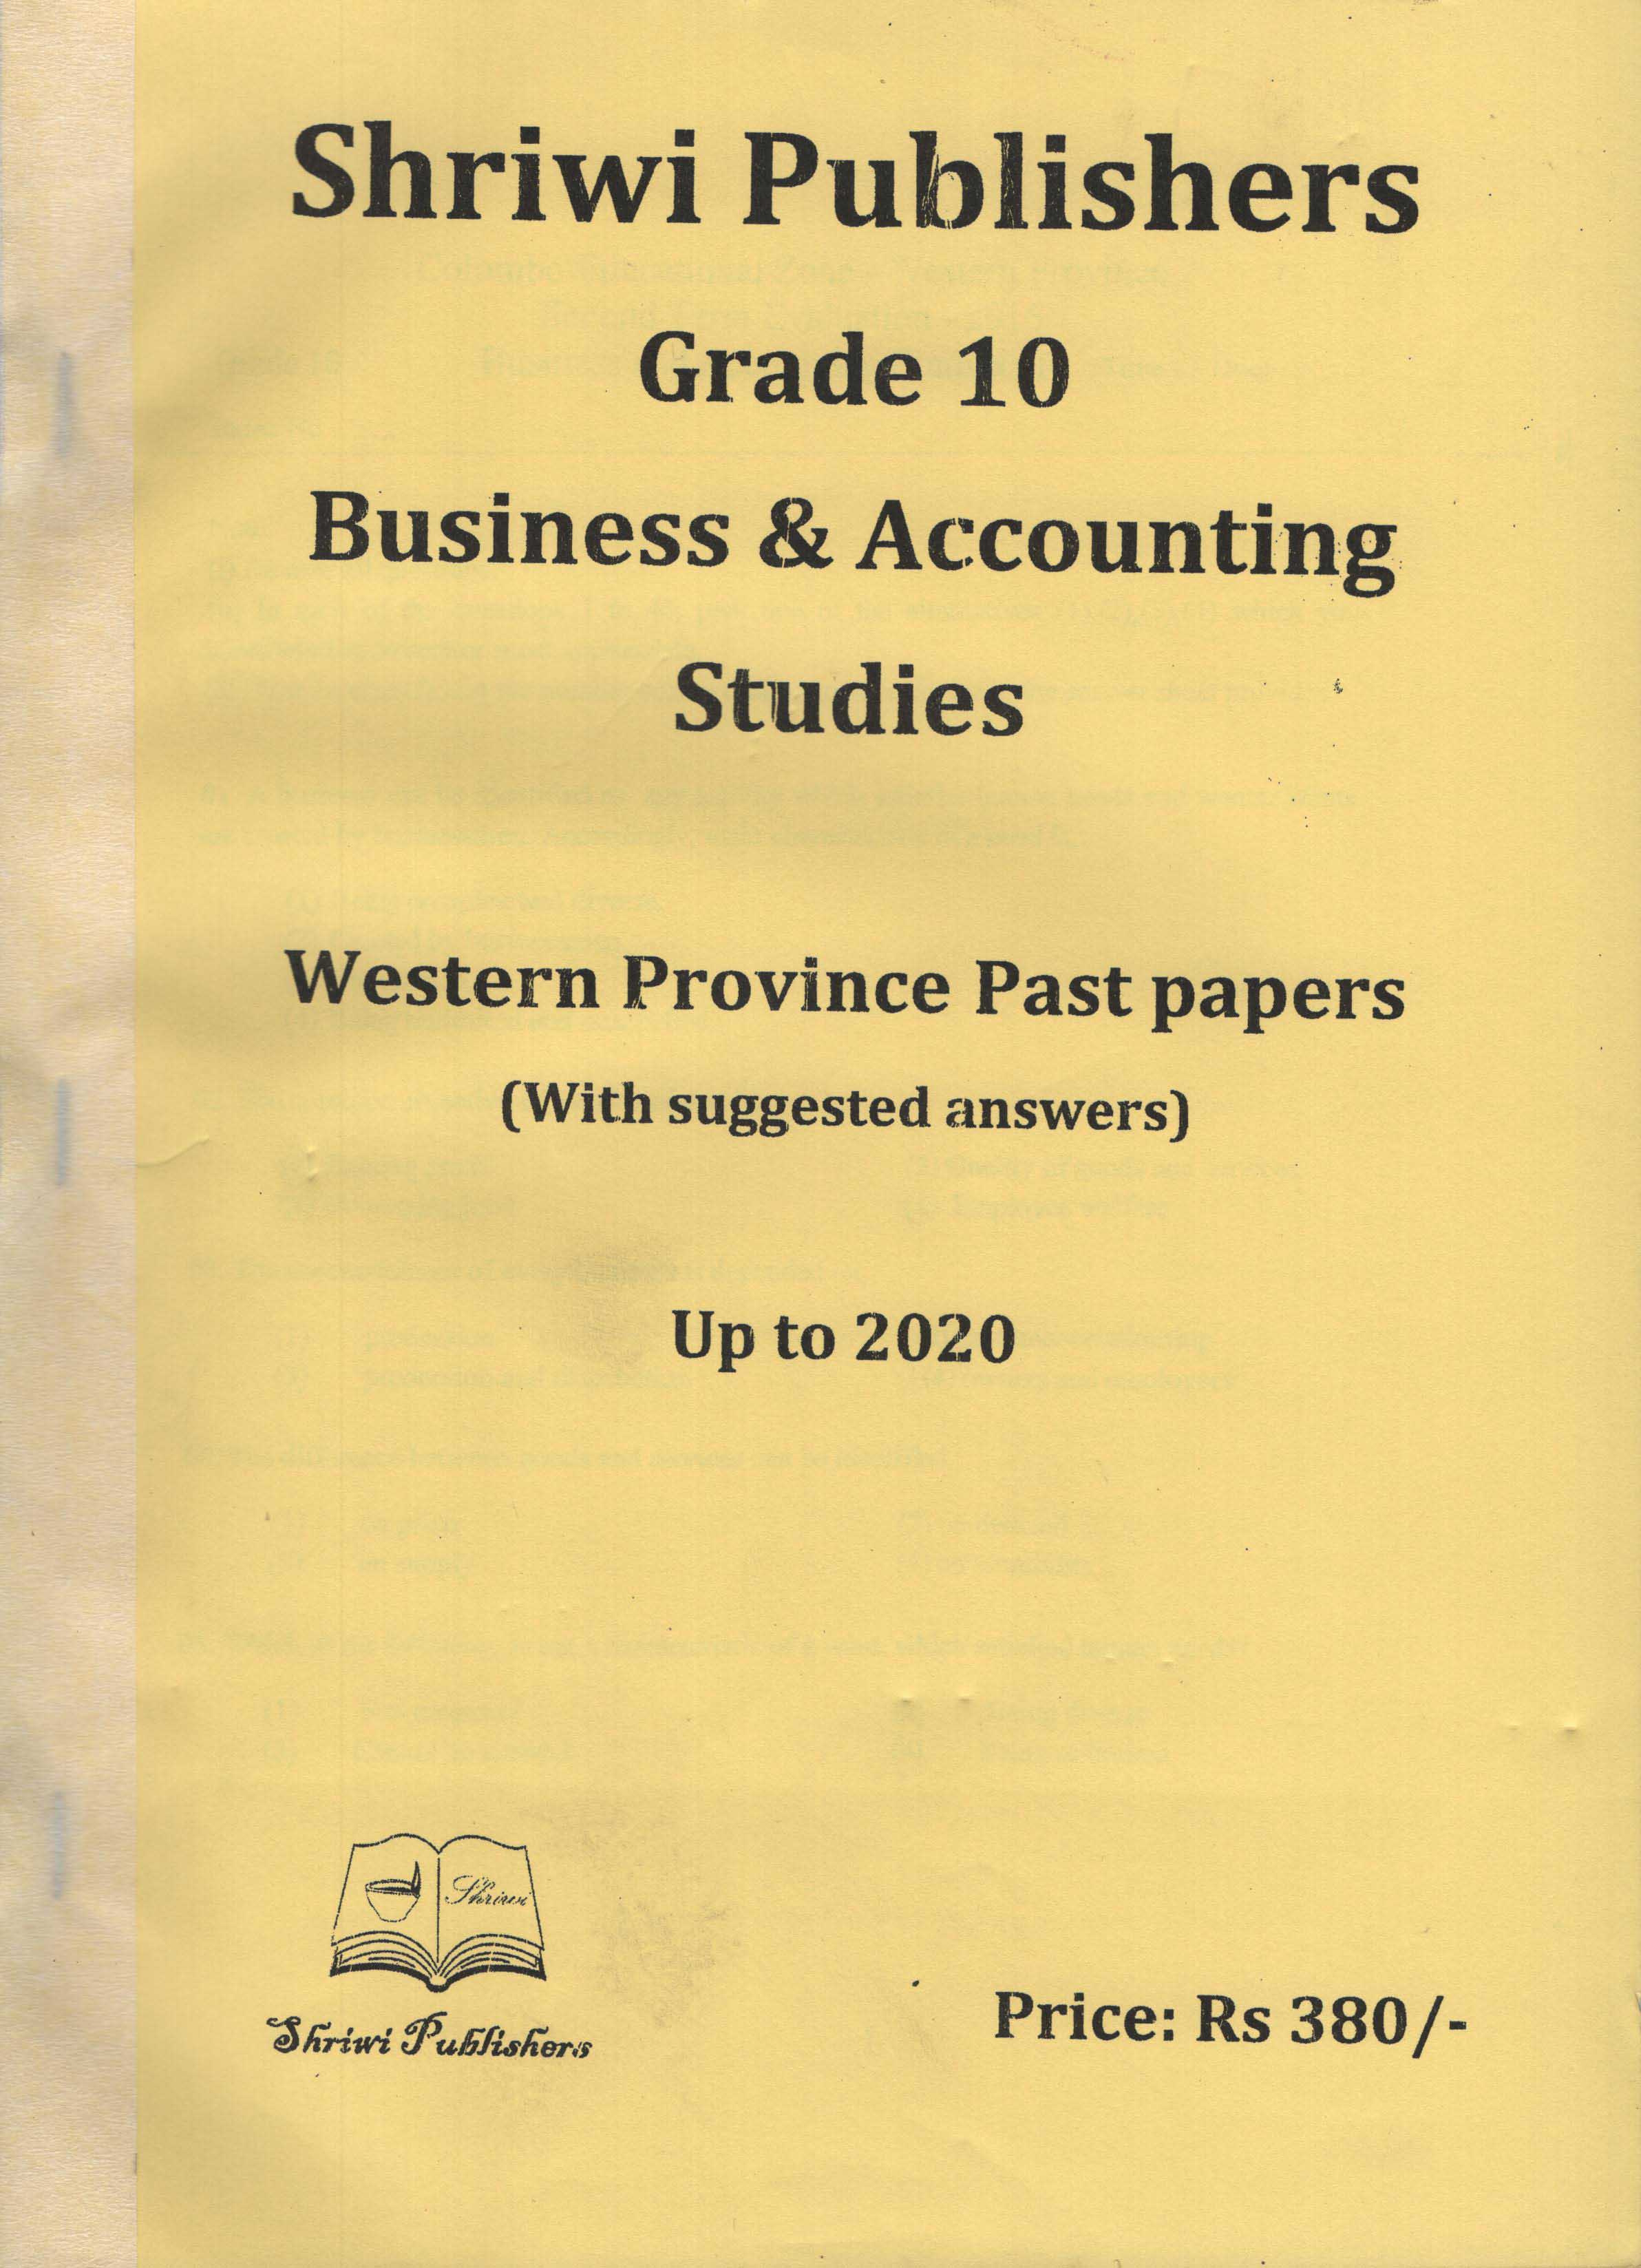 Shriwi Grade 10 Business & Accounting Studies Provincial Past Papers up to 2021 with Suggested Answers (Terms 1,2&3)